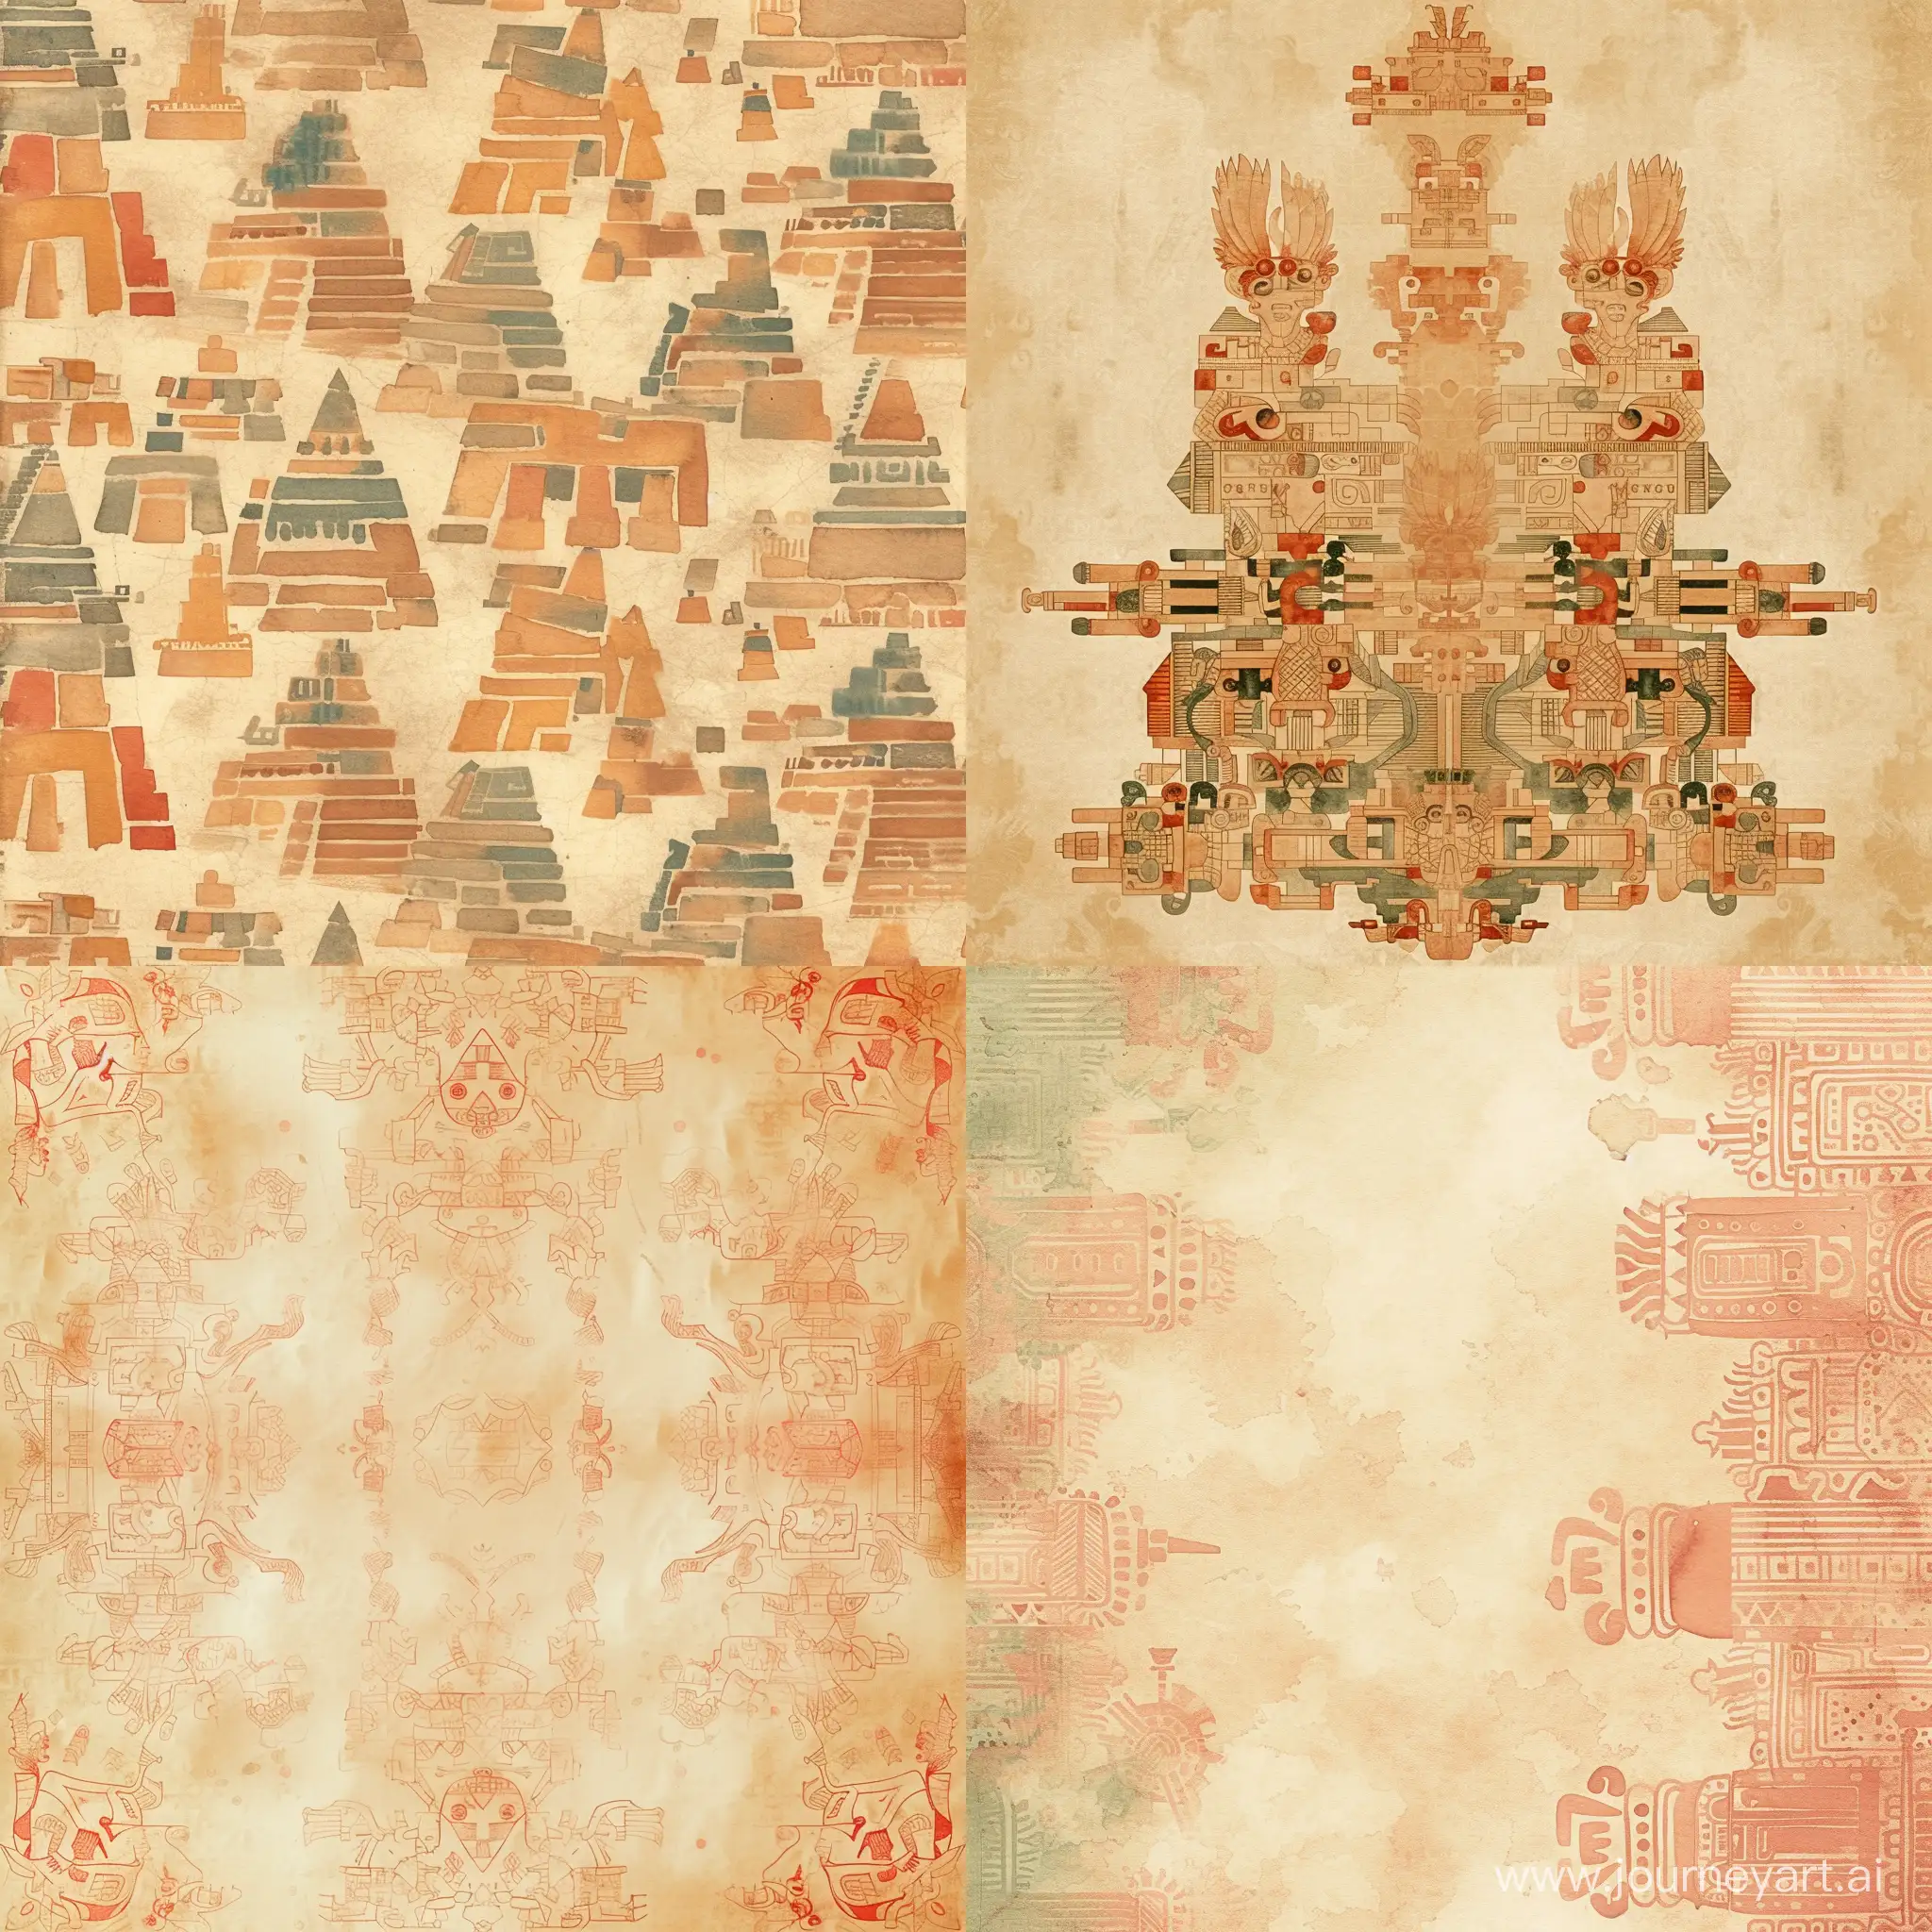 Symmetrical texture of antique paper, barely noticeable elements of ancient Aztec cities, stylized caricature, watercolor, decorative, light colors, flat drawing